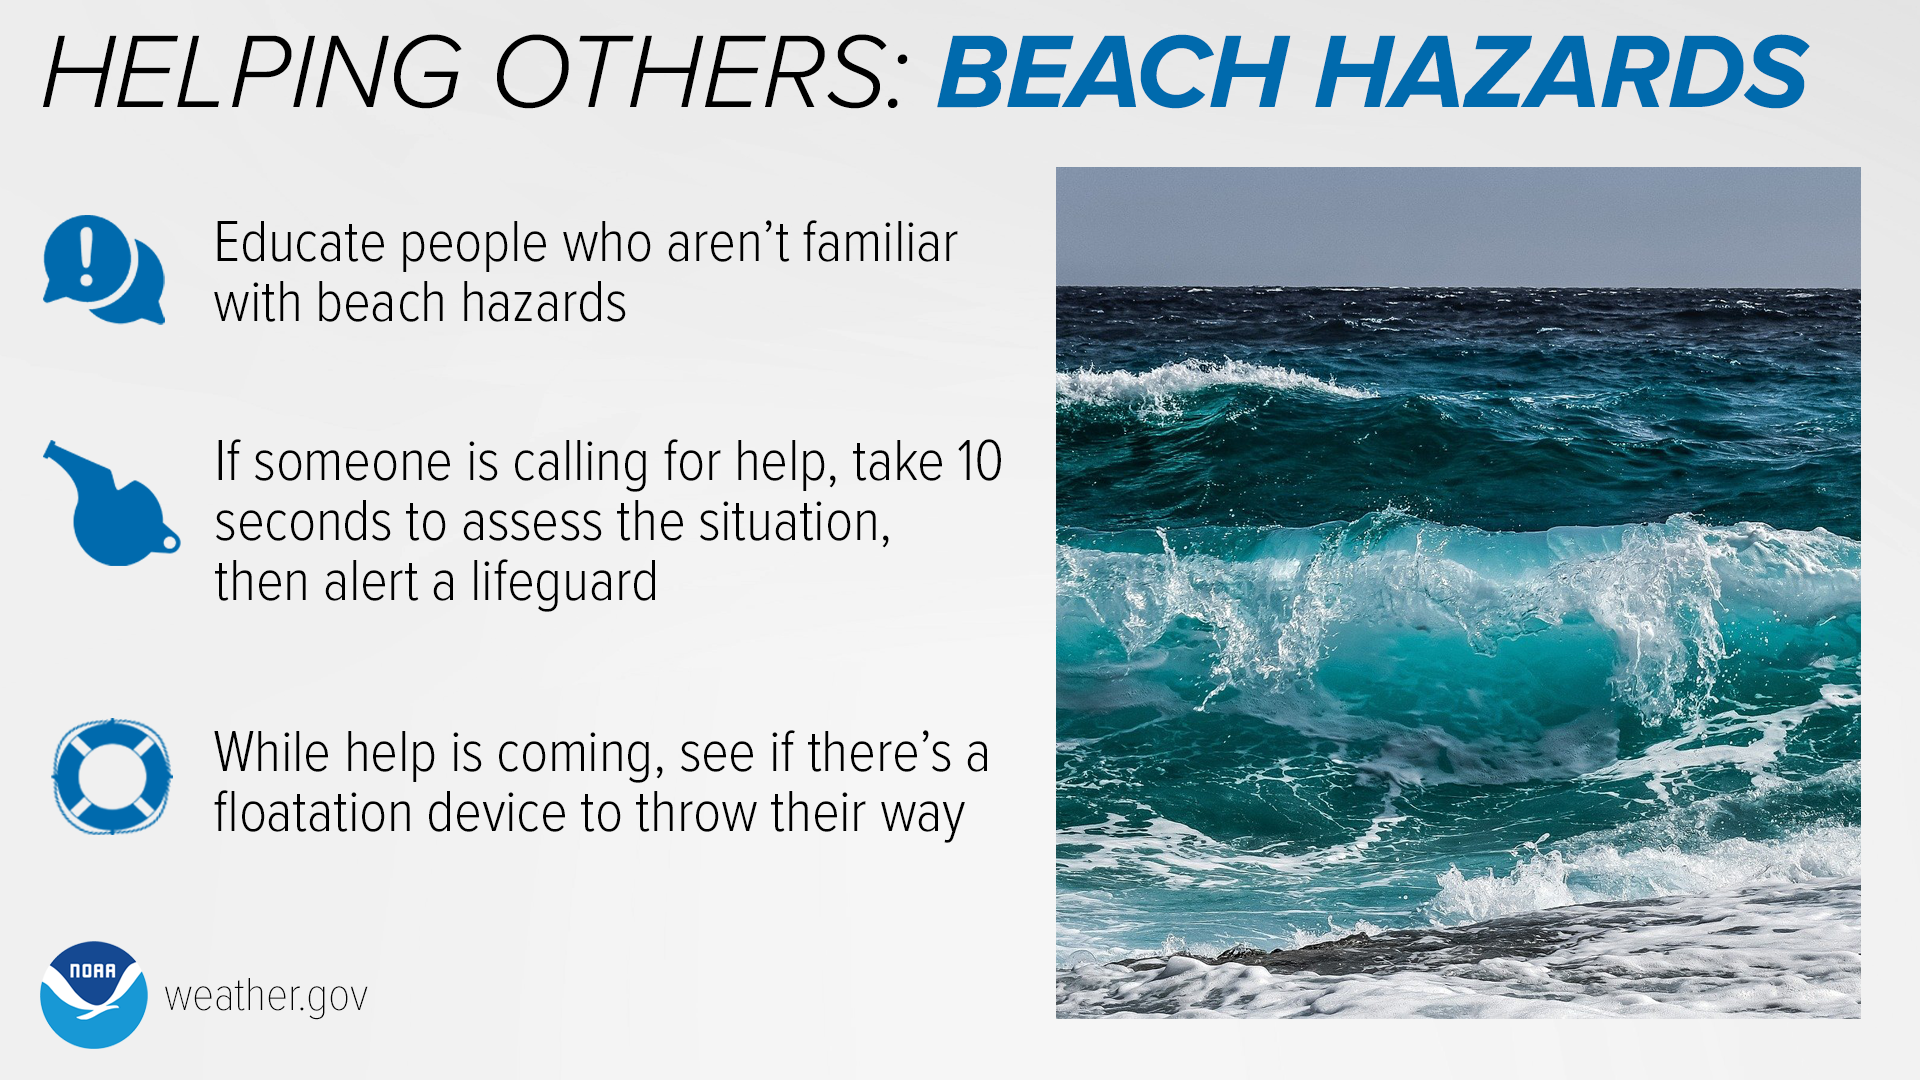 Educate yourself before visiting the beach. Some beach hazards, like rip currents, aren’t always visible to the untrained eye.